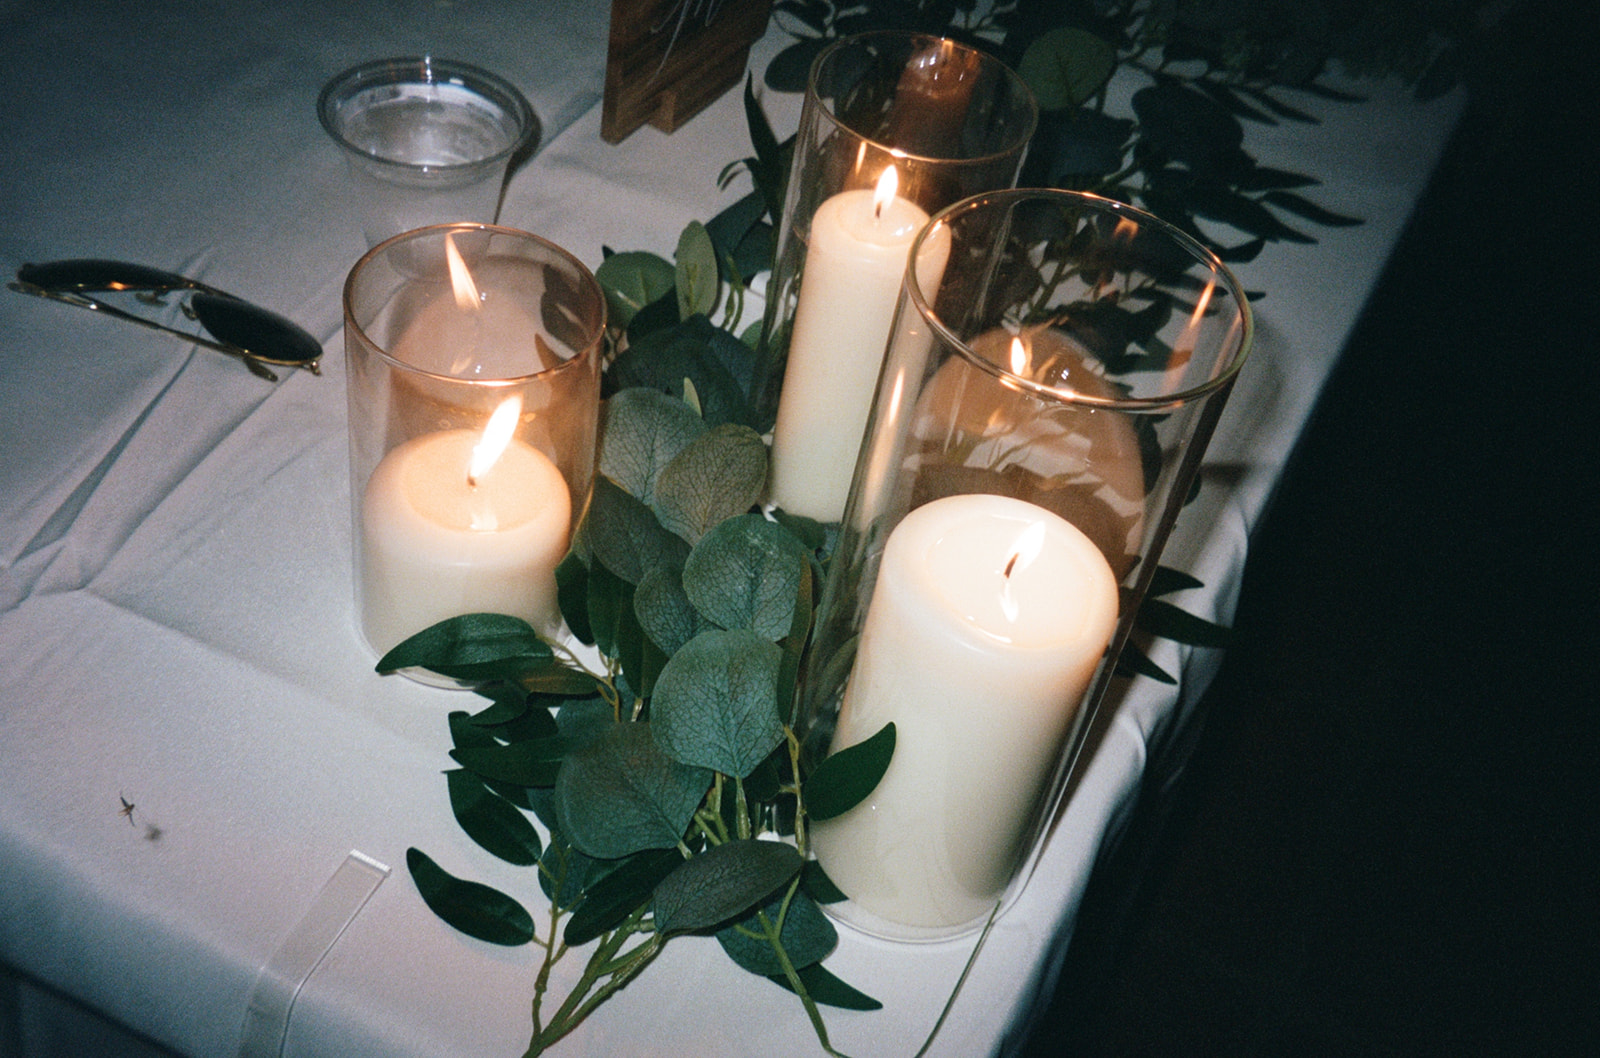 Candle lit wedding reception table